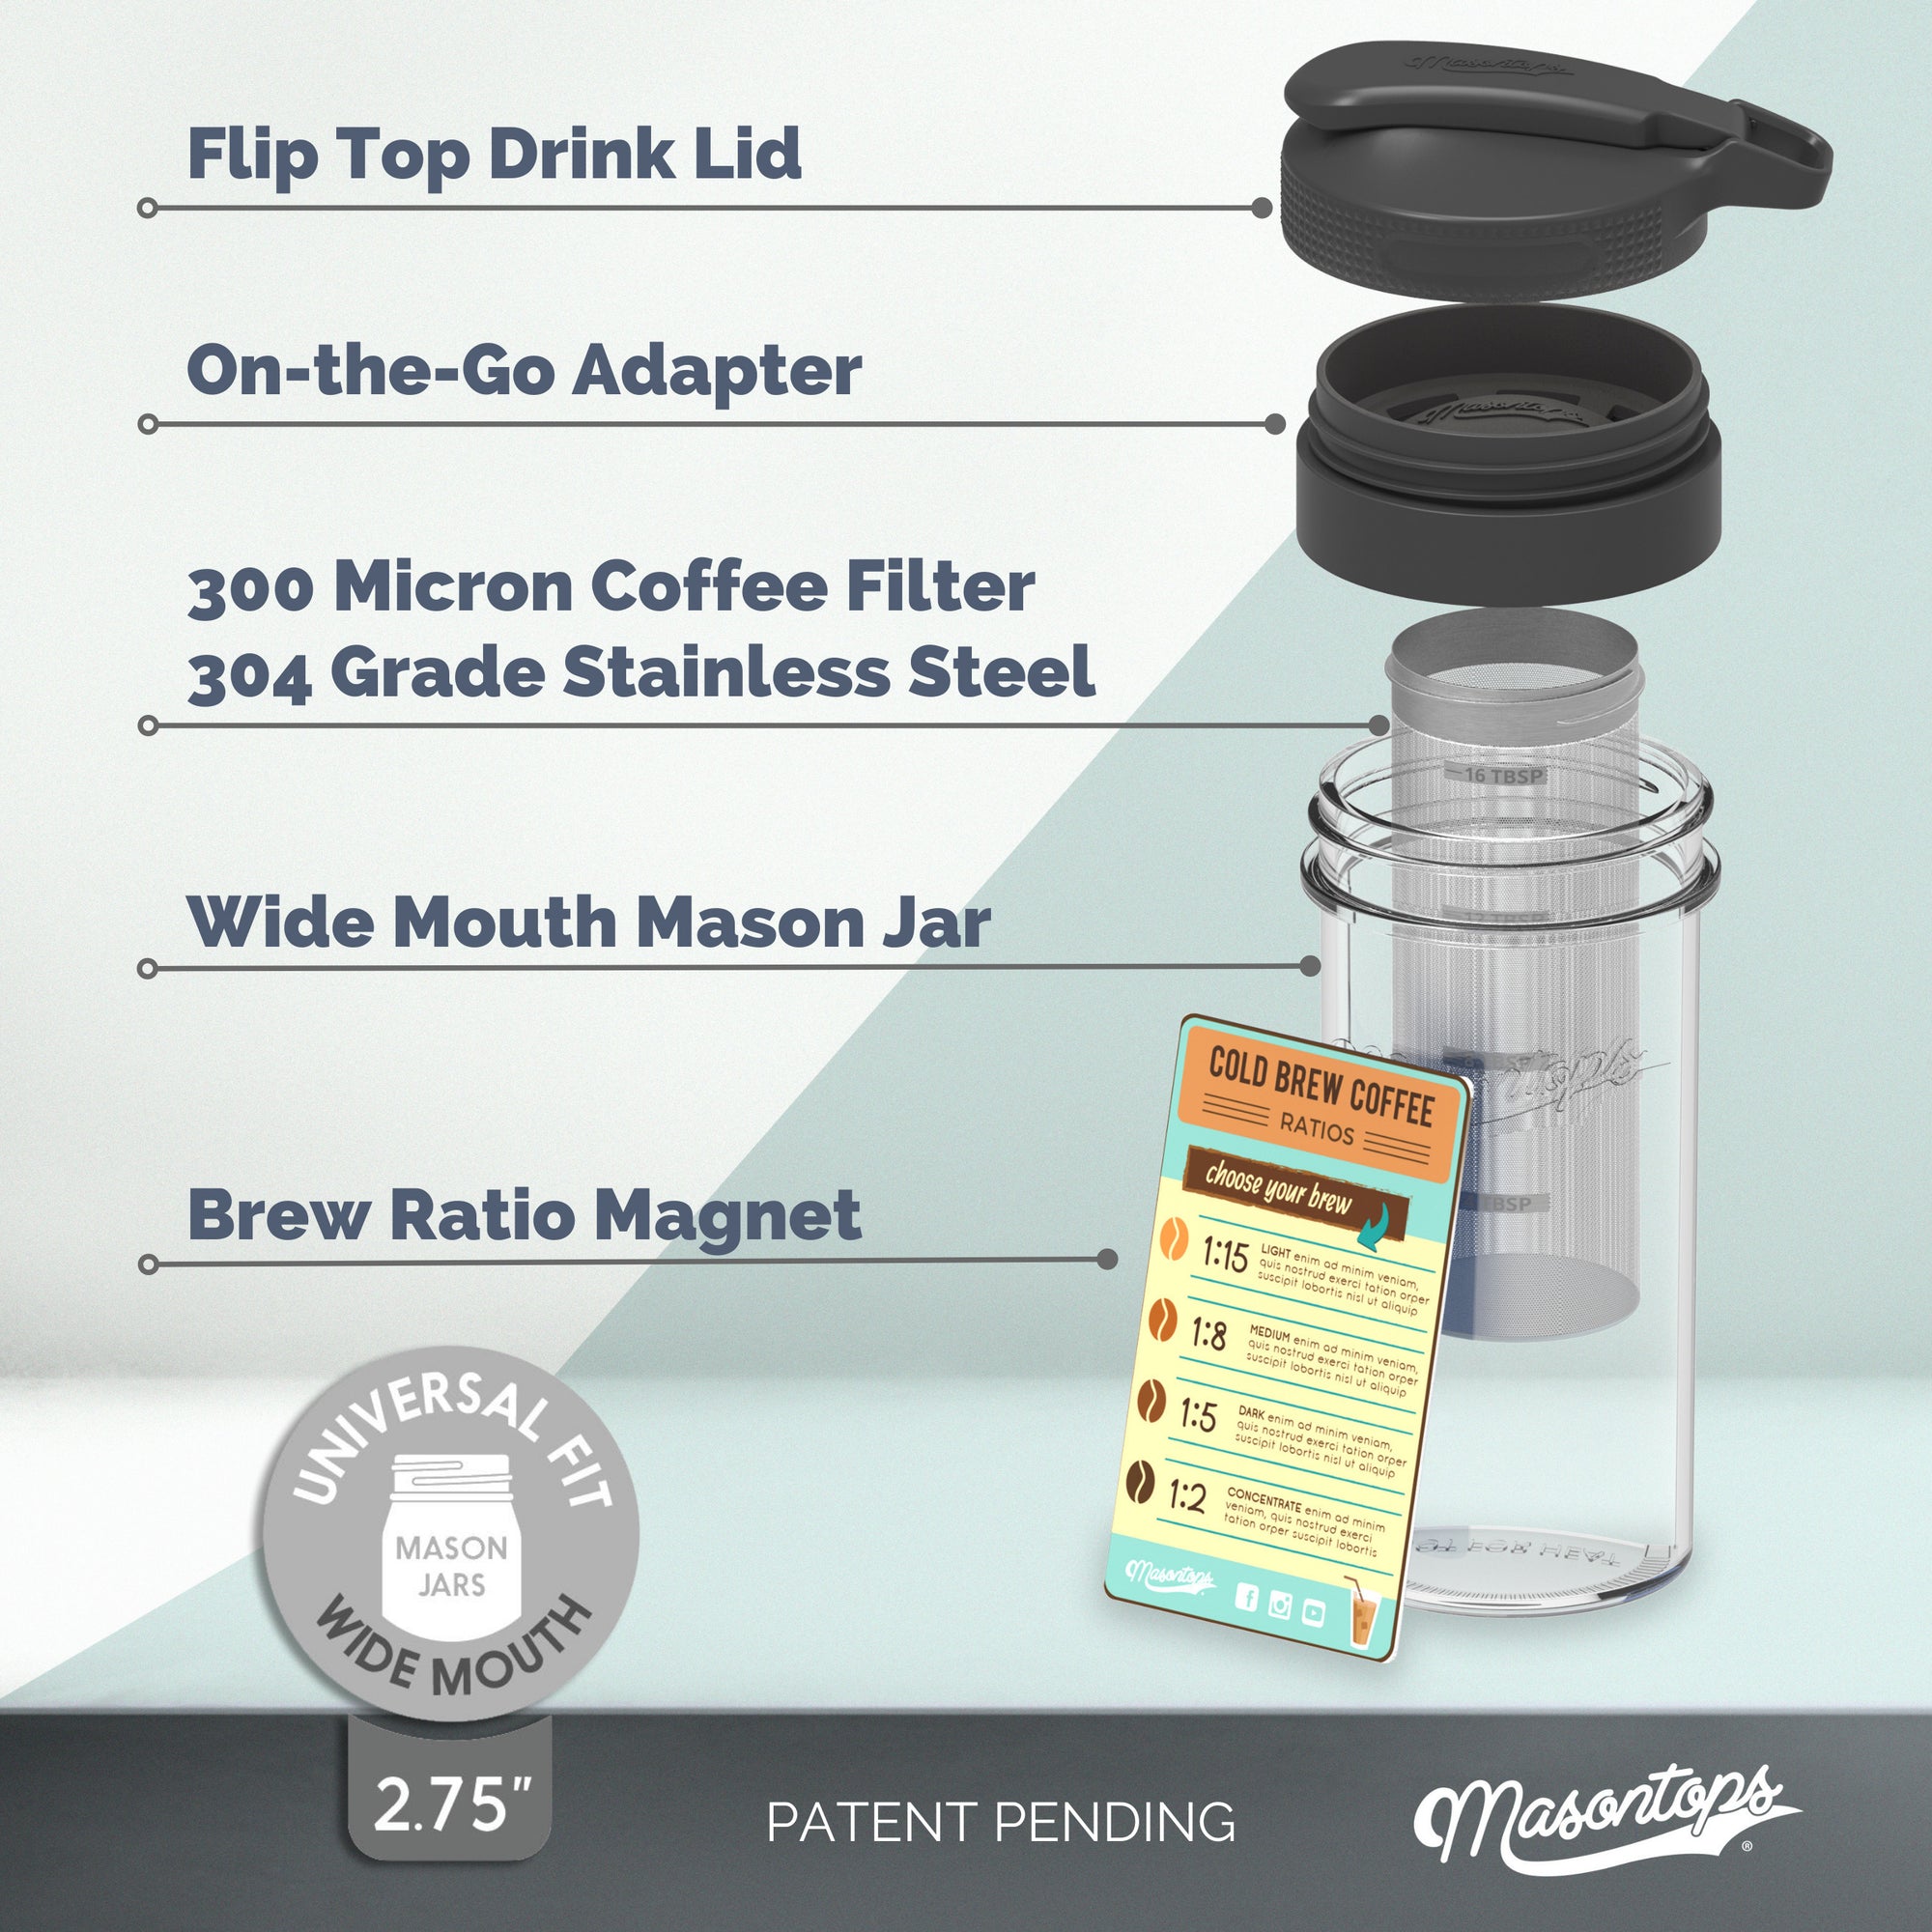 Cold Brew Coffee Maker Kit: Wide Mouth Mason Jar with Screw Top Lid, Stainless Steel Filter for Delicious Brewed Coffee, Infused Tea, Alcohol - 1